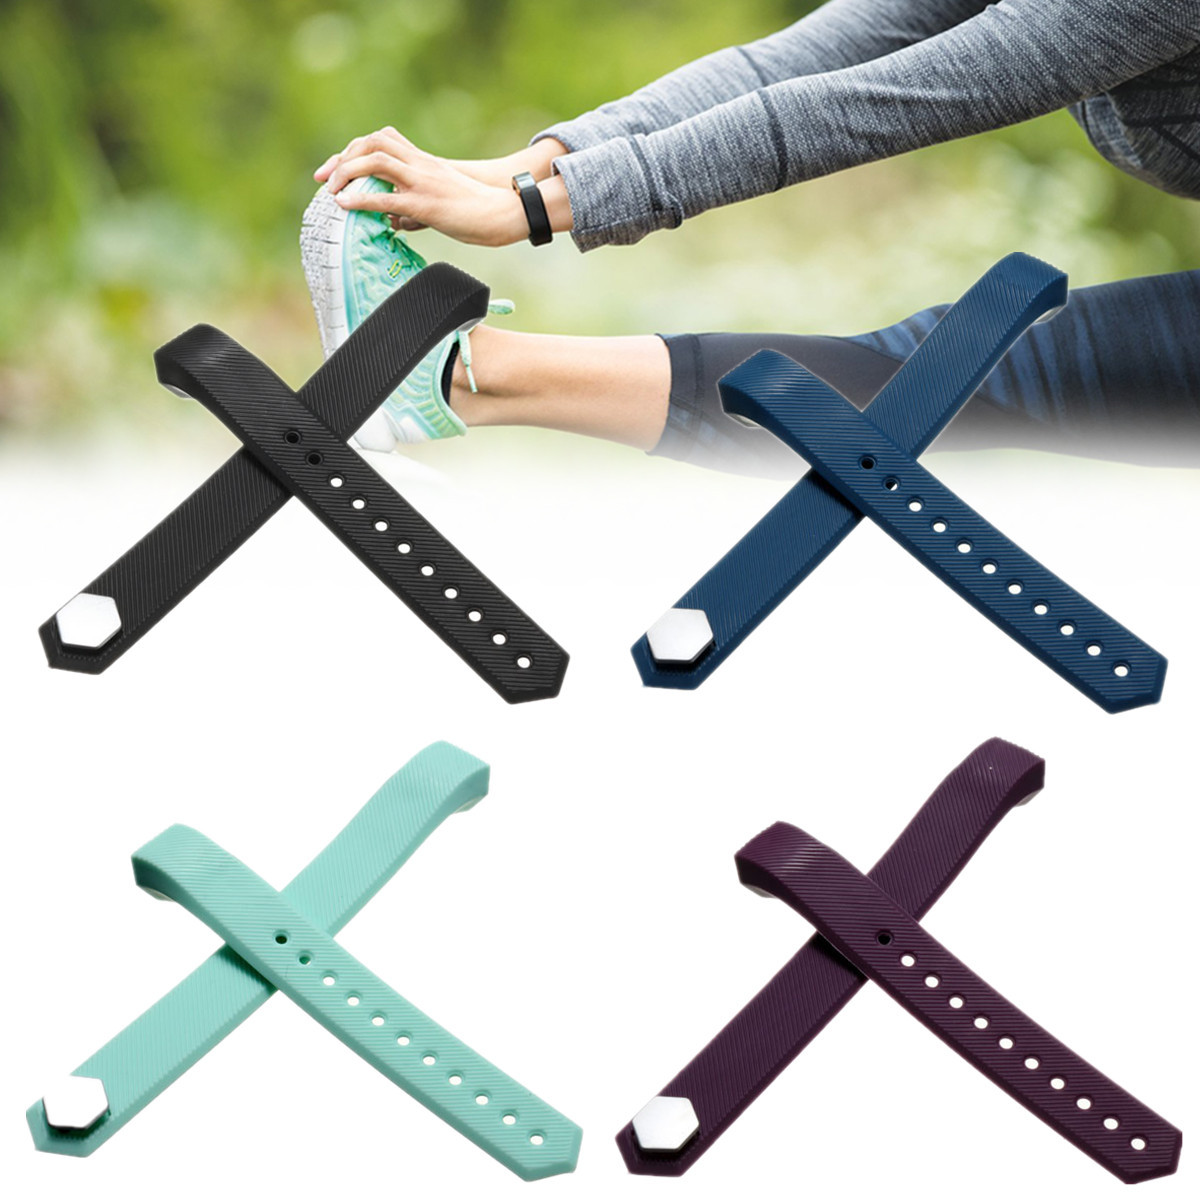 Silicone-Replacement-Wristband-Watch-Band-Strap-Clasp-Small-Size-For-Fitbit-Alta-Tracker-1100052